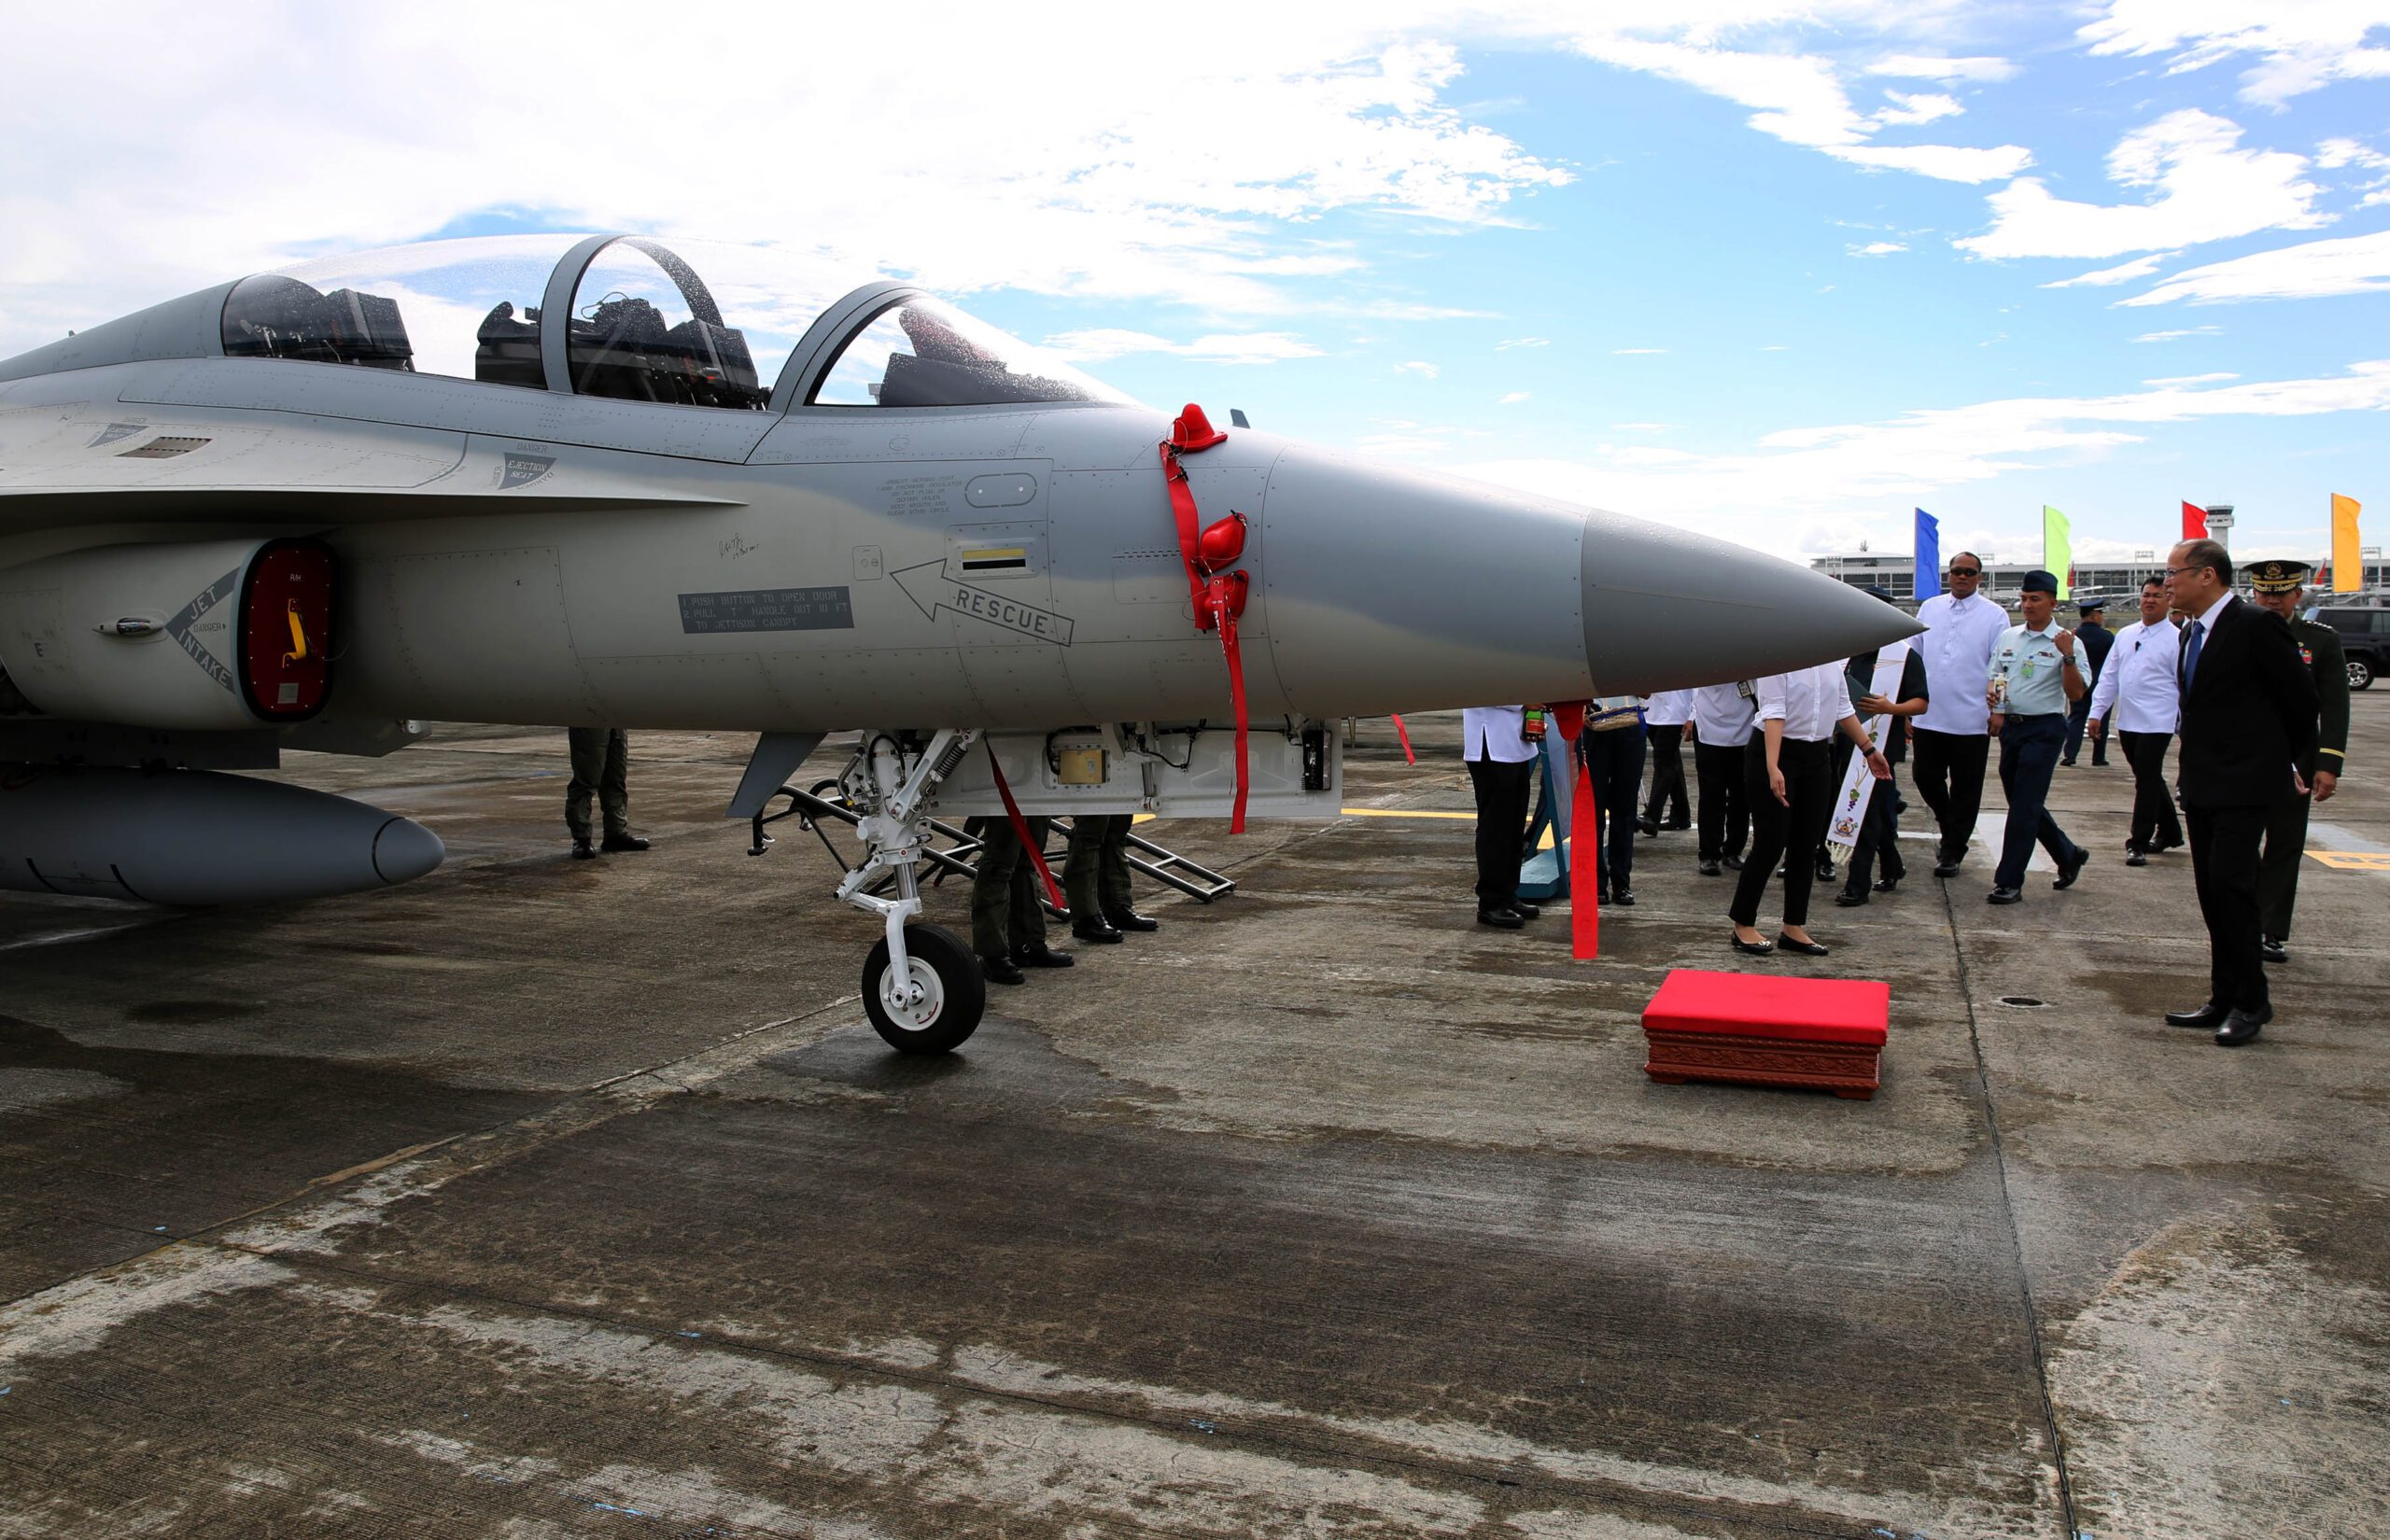 FACT CHECK: FA-50s criticized by Duterte are from S. Korea, not US